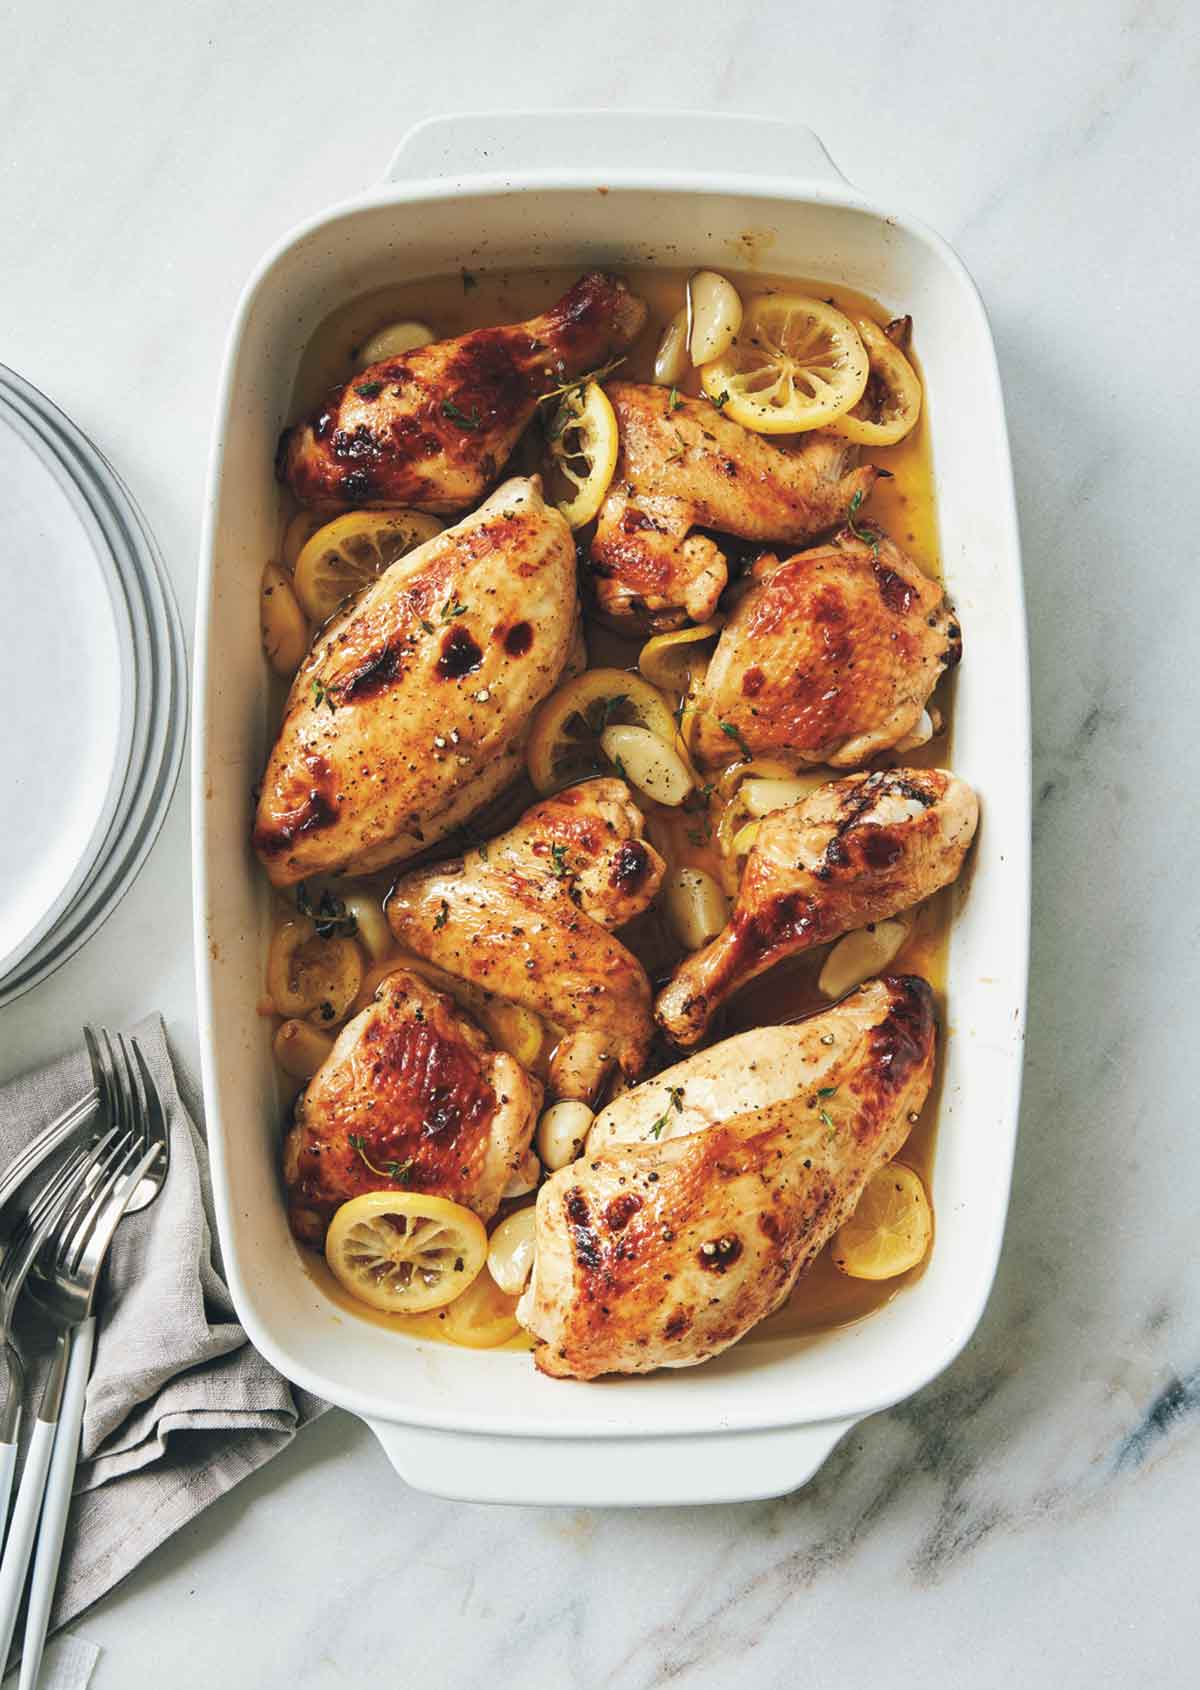 A rectangular baking dish filled with roast chicken, lemon slices, and garlic cloves.